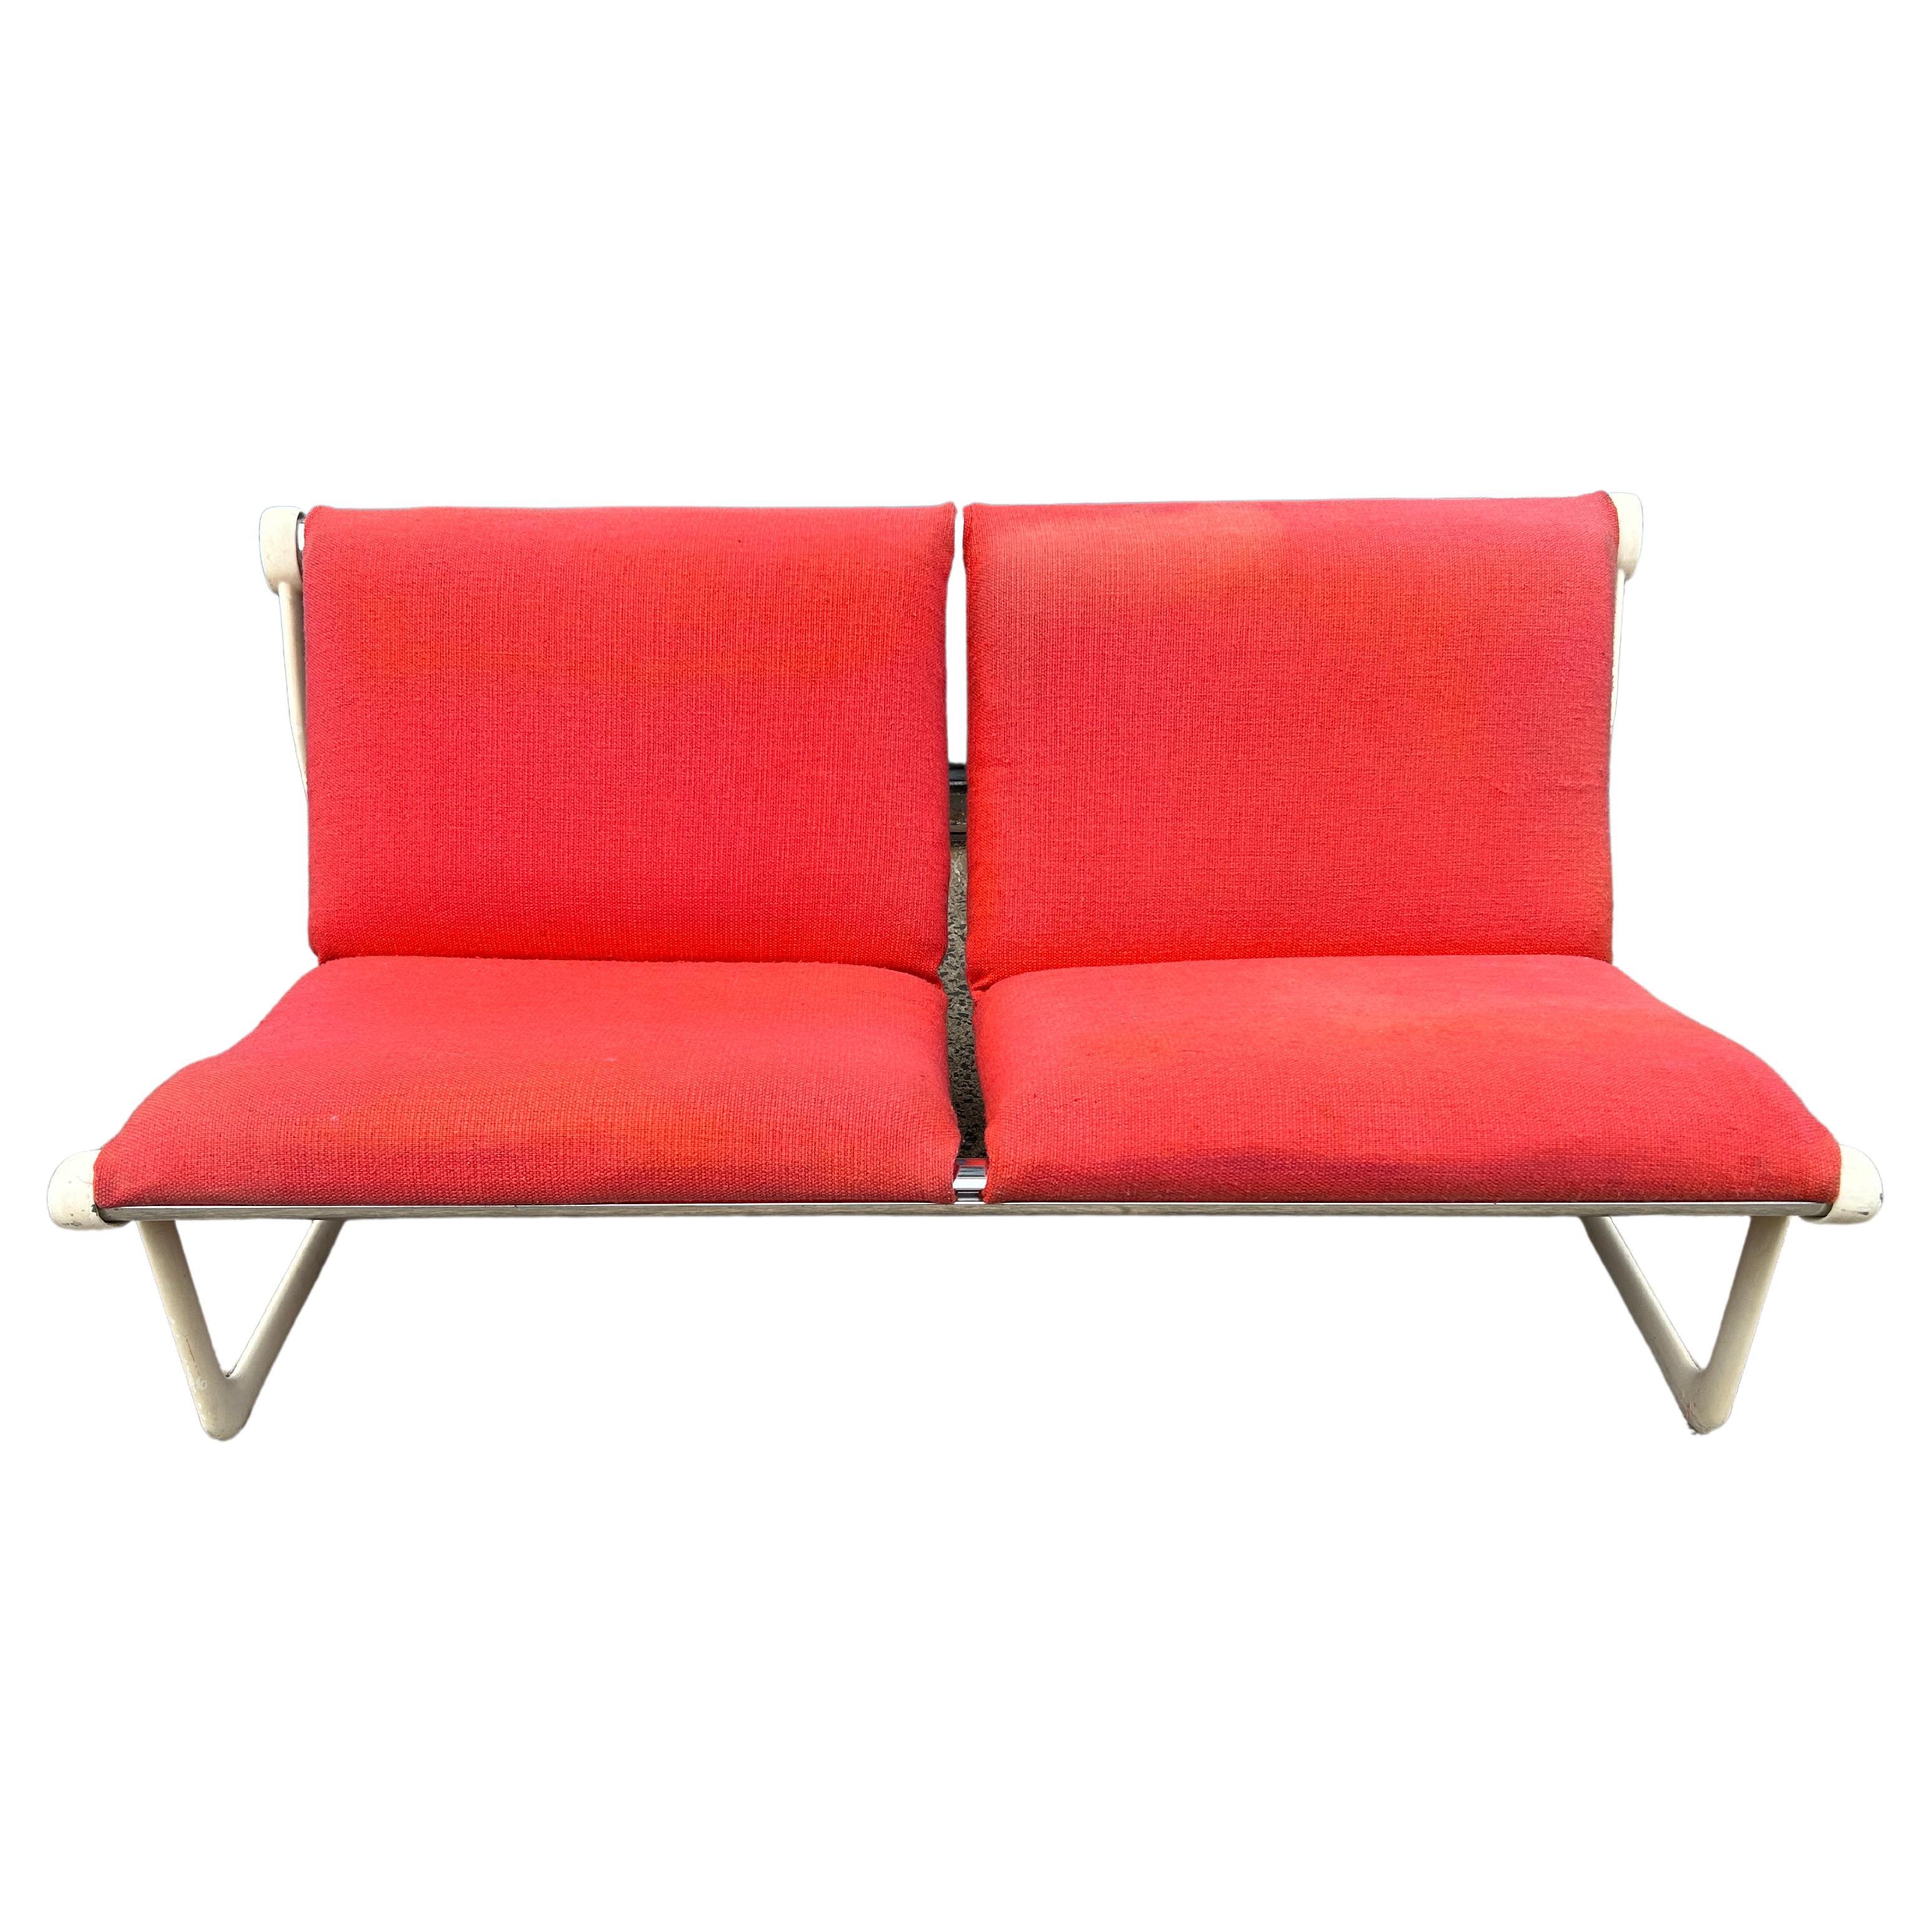 Mid-Century Modern Mid Century Modern 2 Seat Sofa by Bruce Hannah and Andrew Morrison for Knoll 